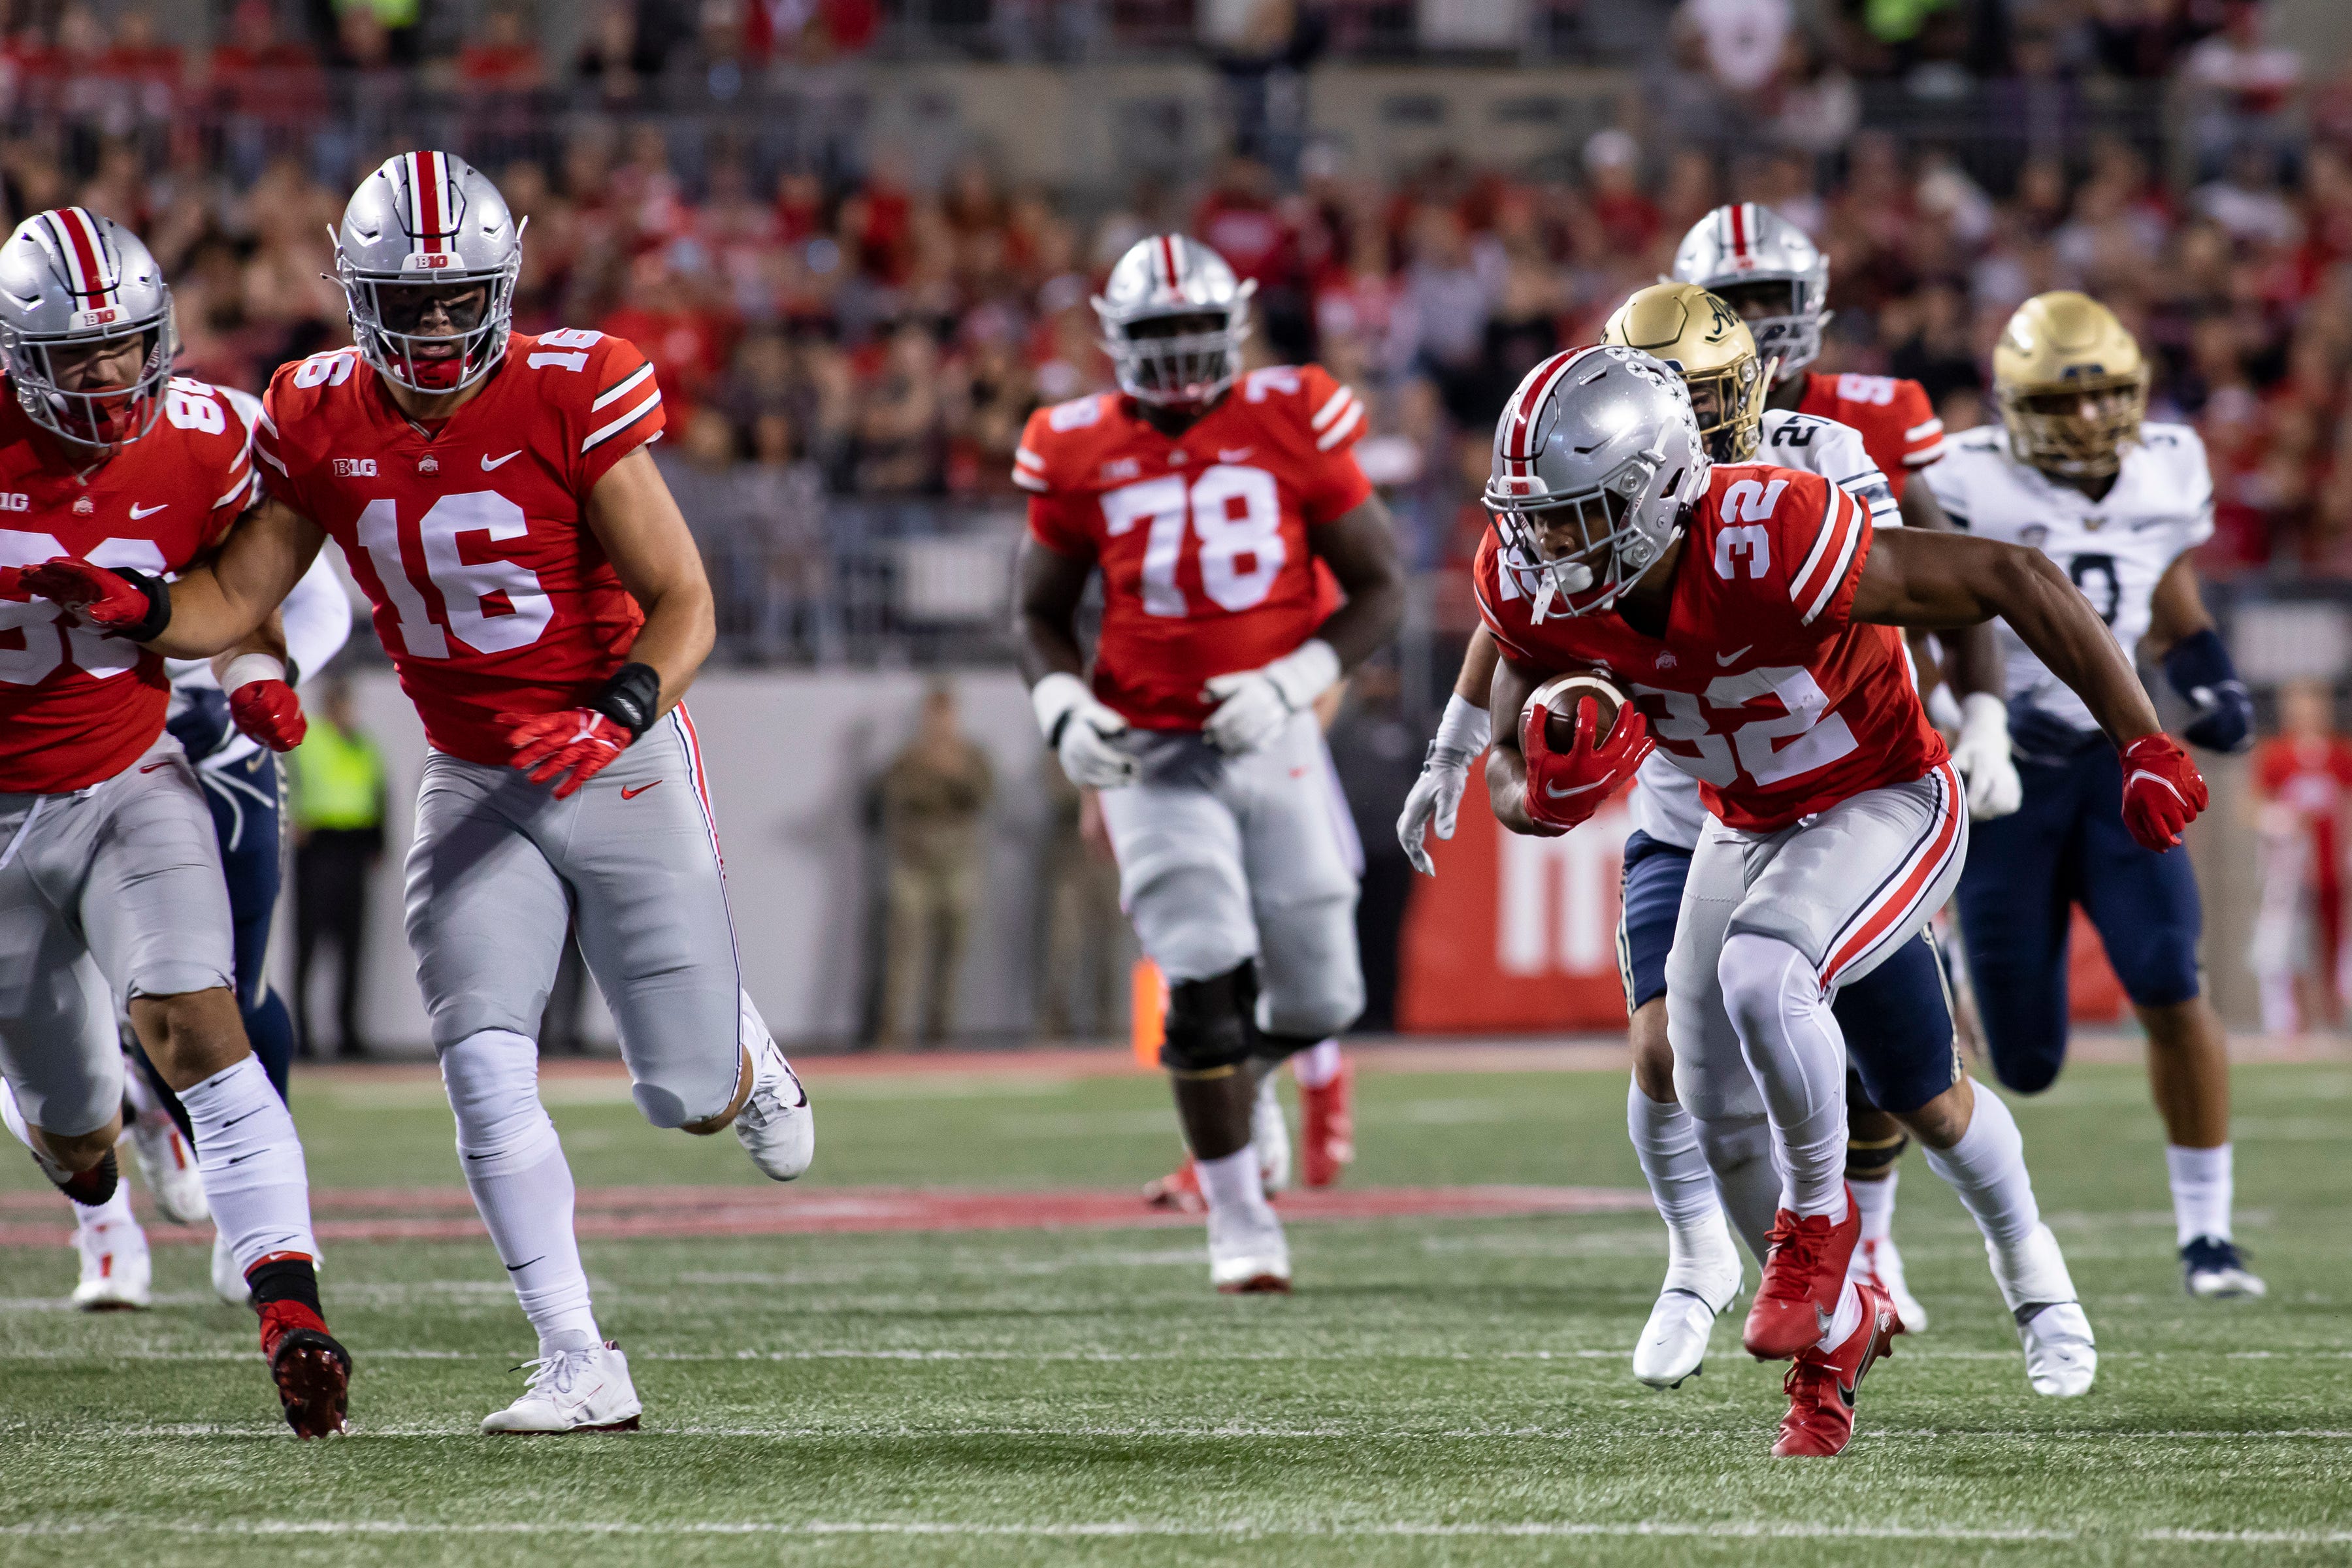 Ohio State Buckeyes running back TreVeyon Henderson (32) runs the ball during the game against the Akron Zips at Ohio Stadium in Columbus, Ohio Sept. 25. Ohio State would win the game 59-7